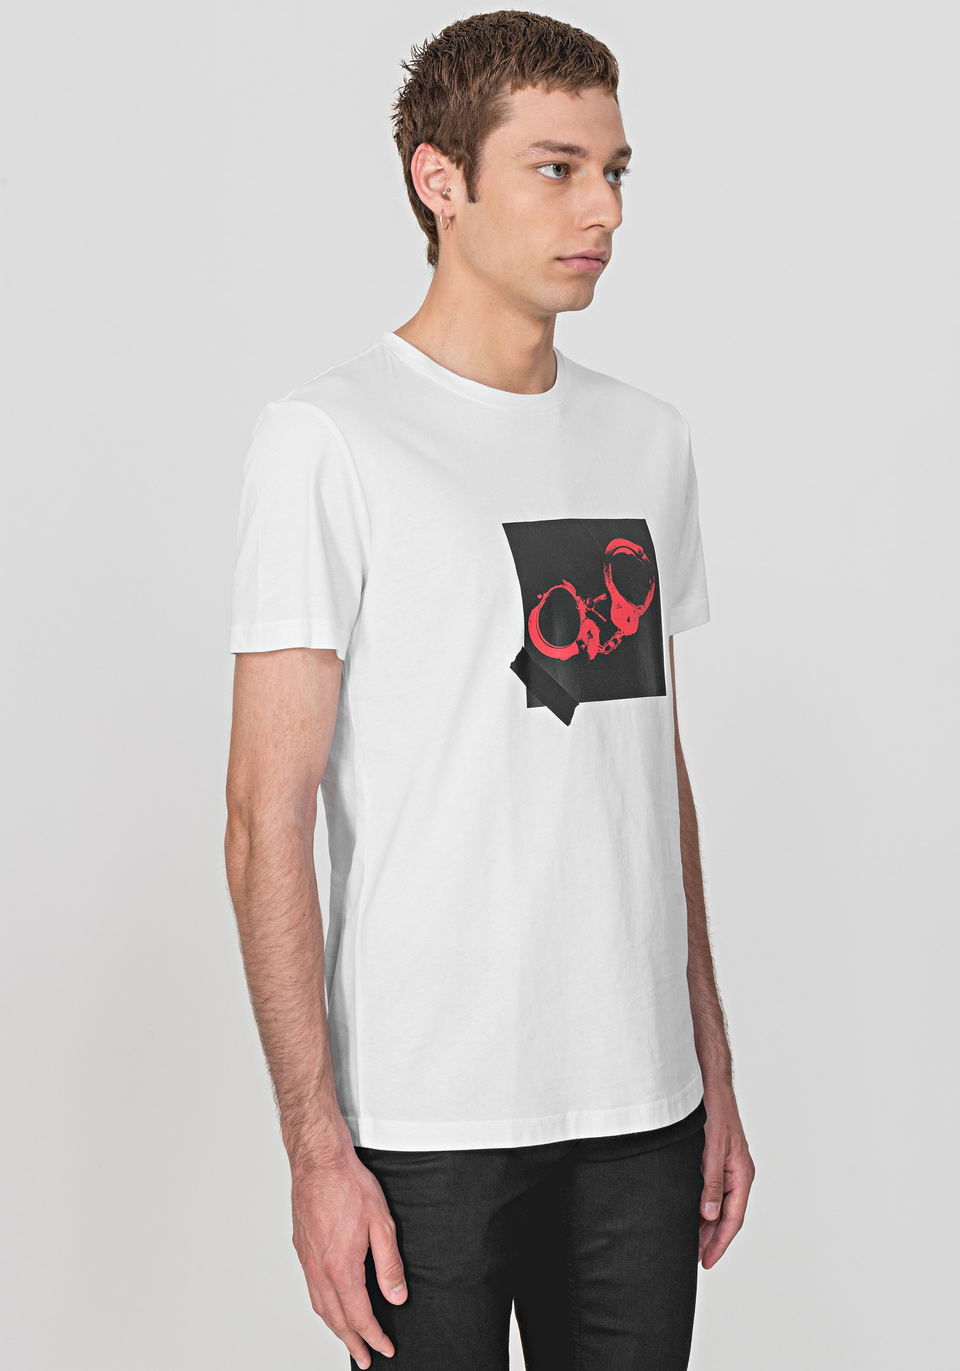 T-SHIRT IN 100% COTTON WITH HANDCUFFS PRINT DESIGN - Antony Morato Online Shop